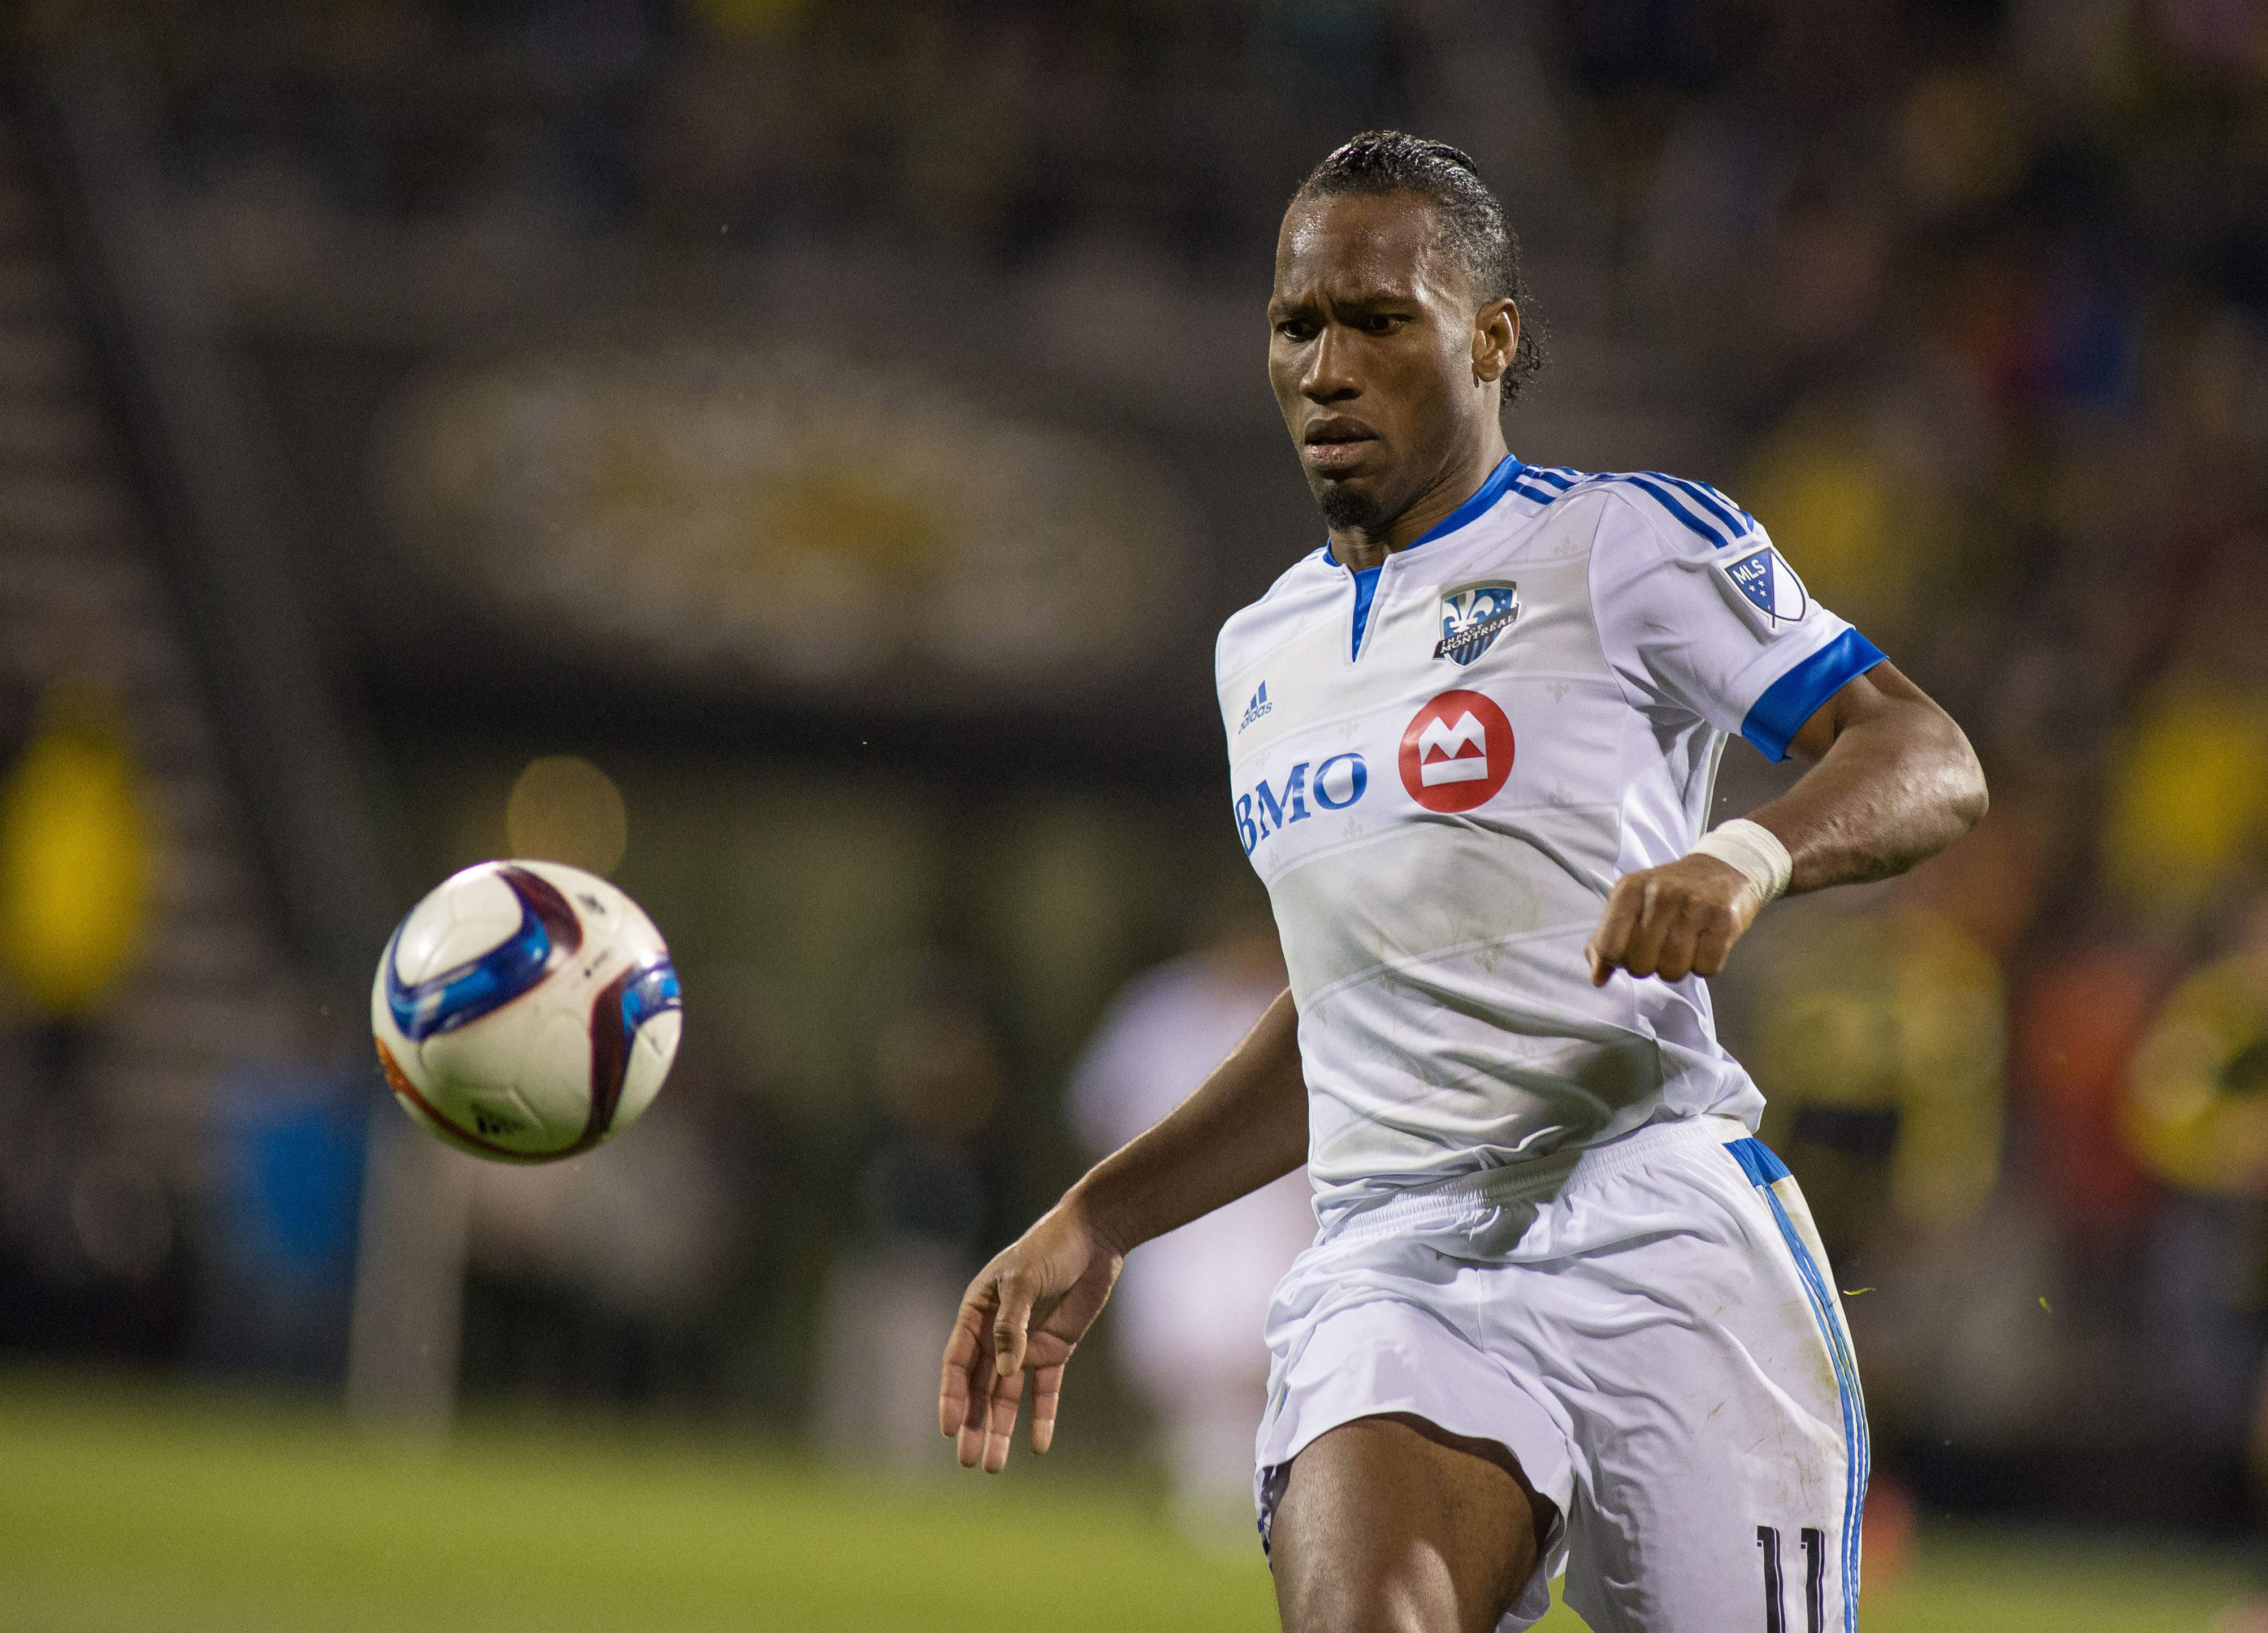 Sep 26, 2015; Columbus, OH, USA; Montreal Impact forward Didier Drogba (11) chases down a ball during the extra time in the game against the Columbus Crew SC at MAPFRE Stadium. Columbus beat Montreal in extra time 4-3 on aggregate. Mandatory Credit: Trevor Ruszkowski-USA TODAY Sports